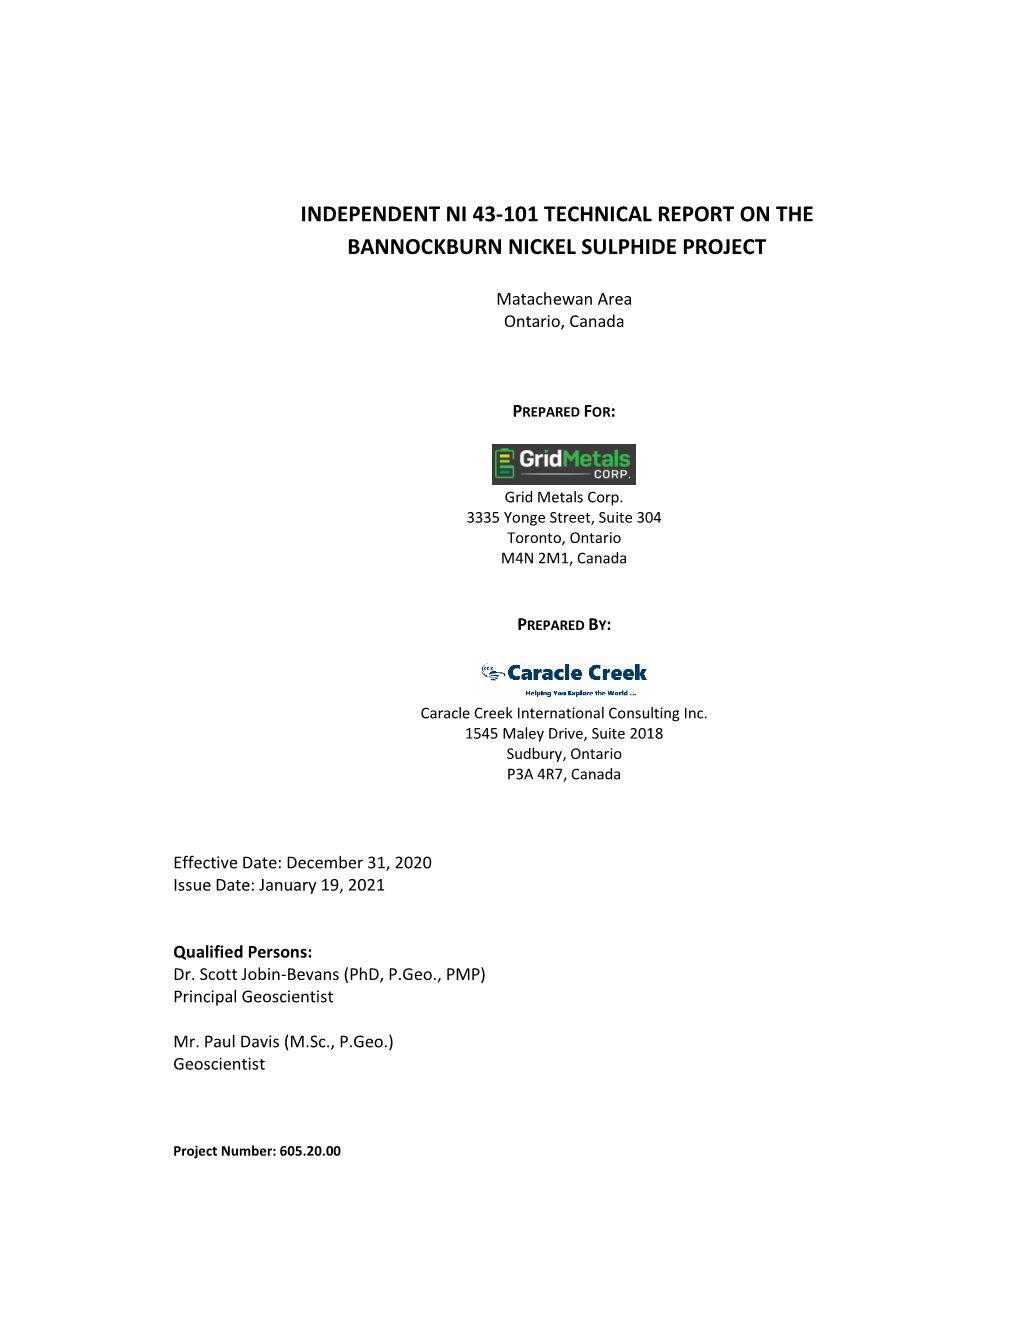 Independent Ni 43-101 Technical Report on the Bannockburn Nickel Sulphide Project